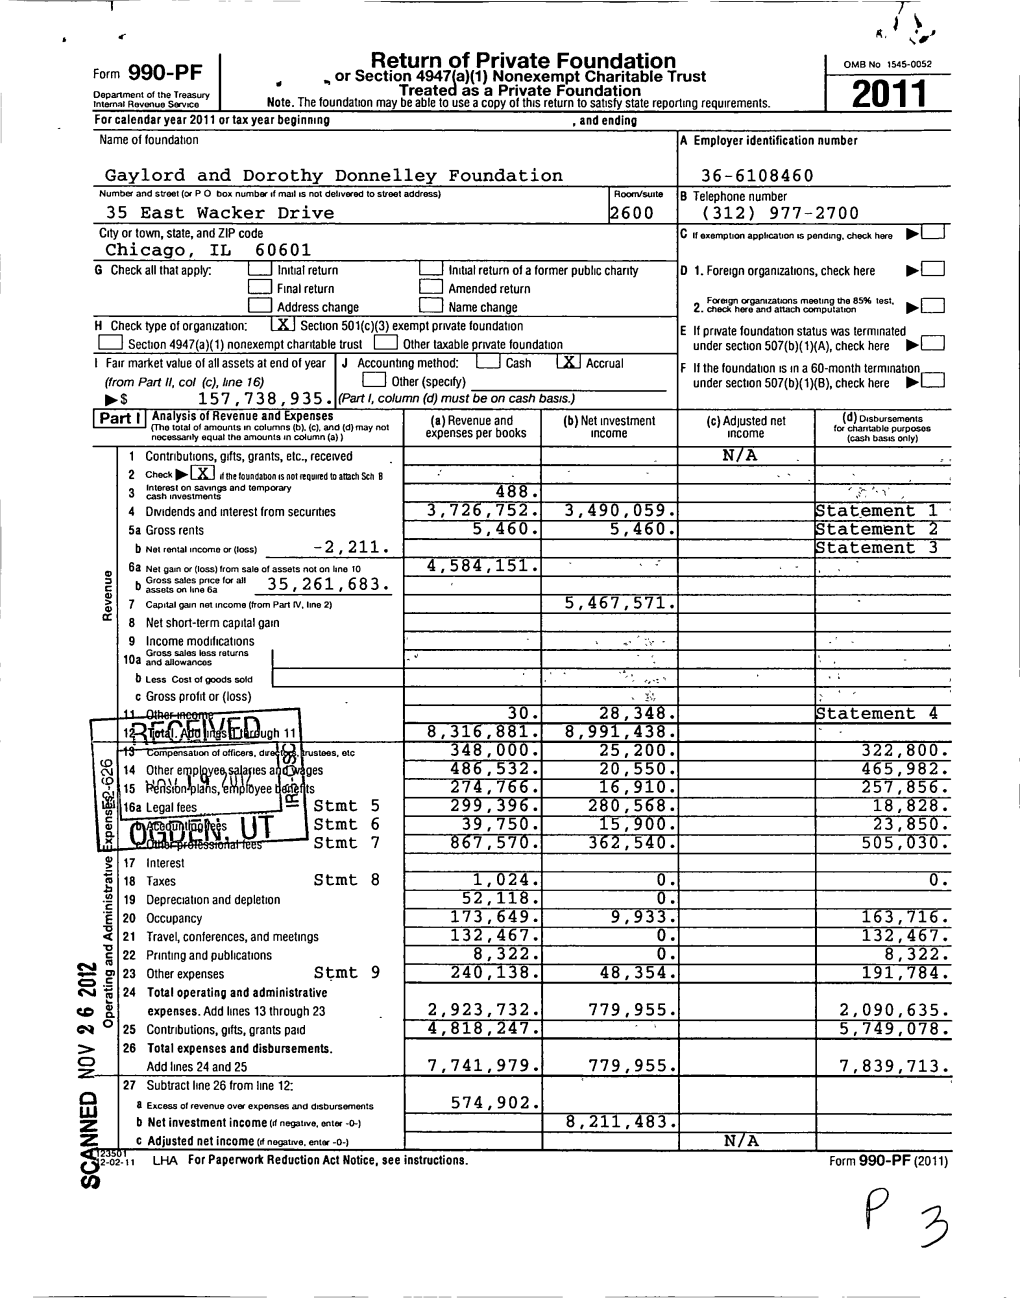 Return of Private Foundation Form 990-PF